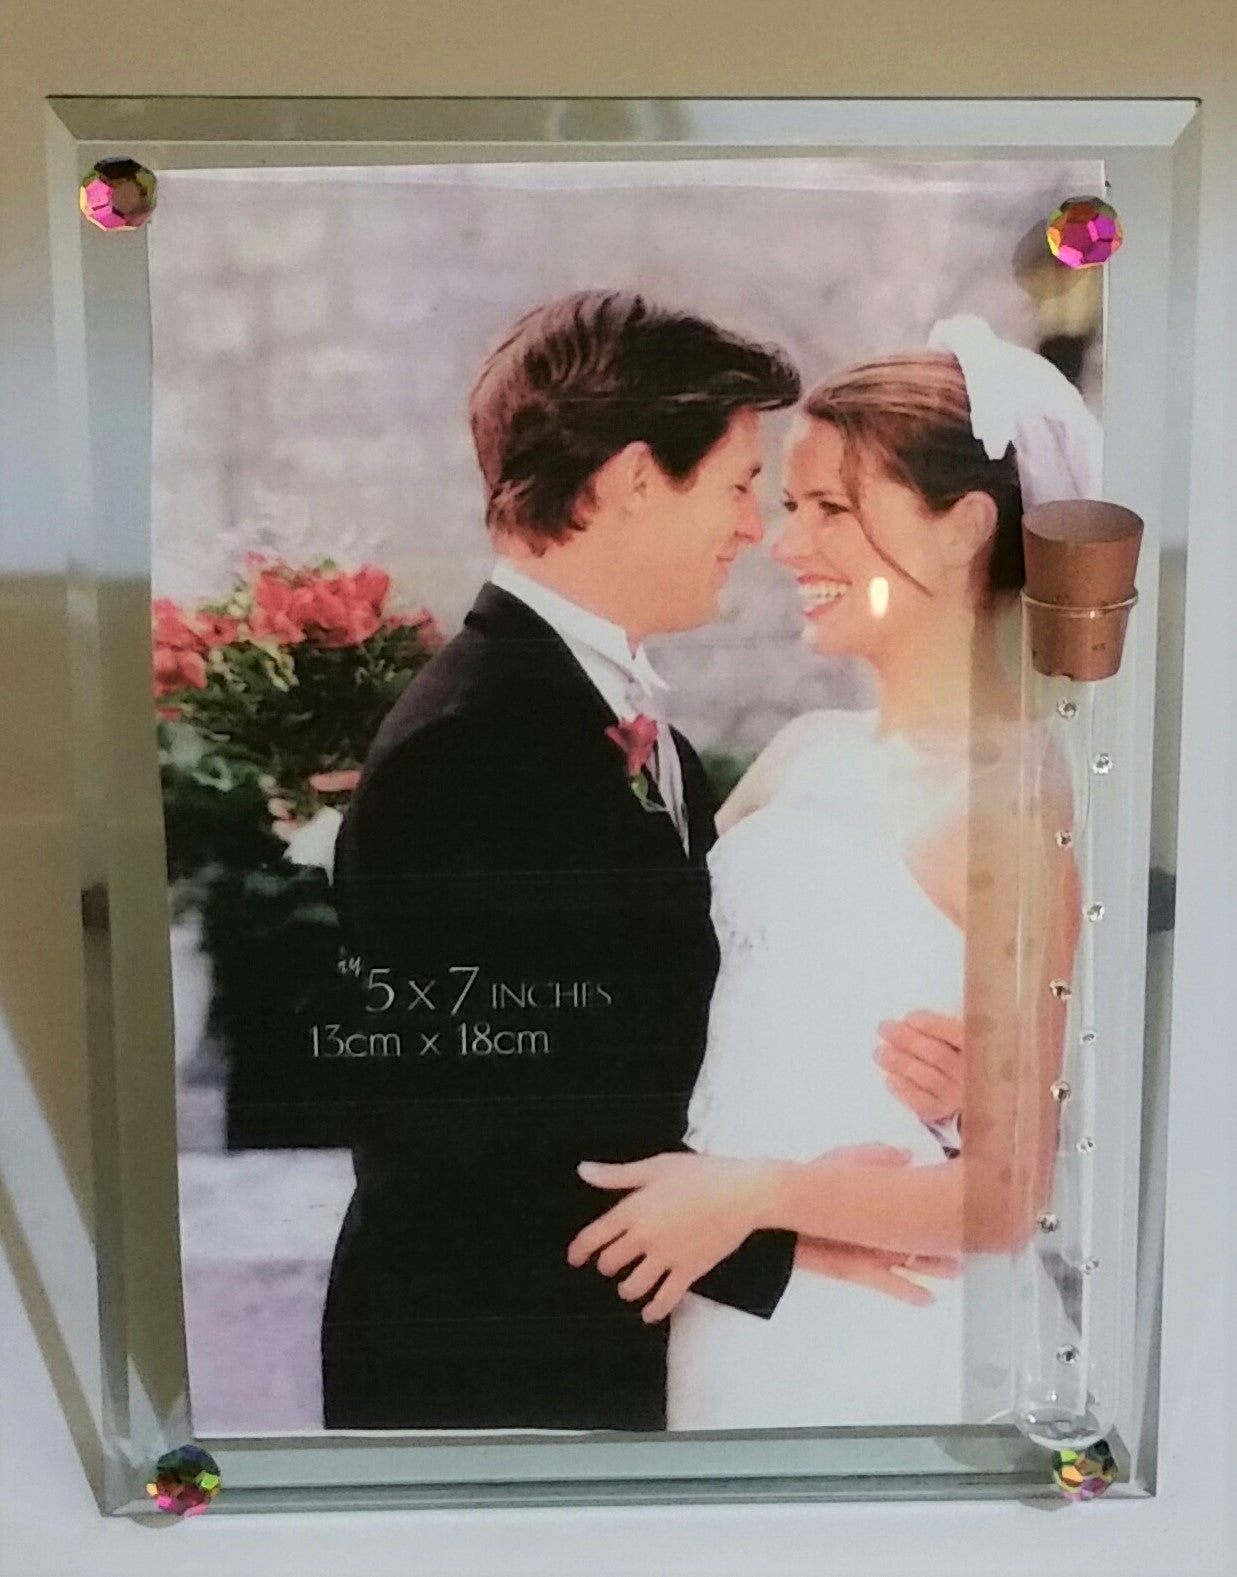 Jewish Wedding Picture Frame - Holds Shards From Wedding Ceremony - Jewish Wedding Gift